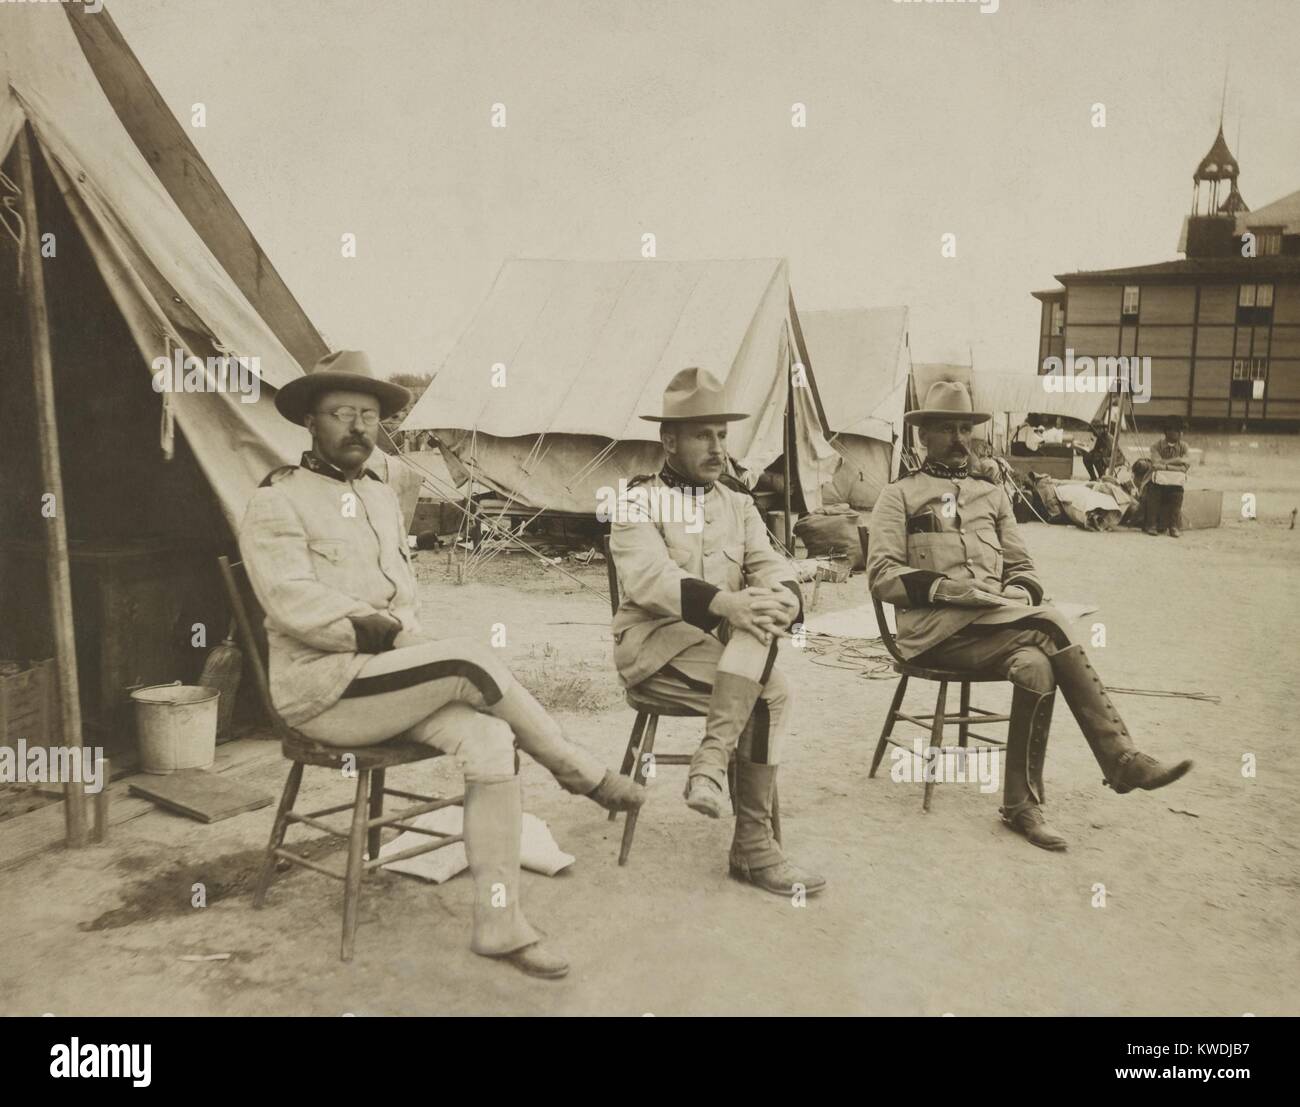 Theodore Roosevelt, Leonard Wood, and Alexander Brodie in 1898, in San Antonio, Texas. Wood and Roosevelt organized the 1st Volunteer Cavalry regiment, the Rough Riders, when the Spanish–American War. Brodie, a career officier, raised the Arizona Division of the Rough Riders. The 1st Volunteer Cavalry trained in San Antonio in April-May 1898 (BSLOC 2017 10 22) Stock Photo